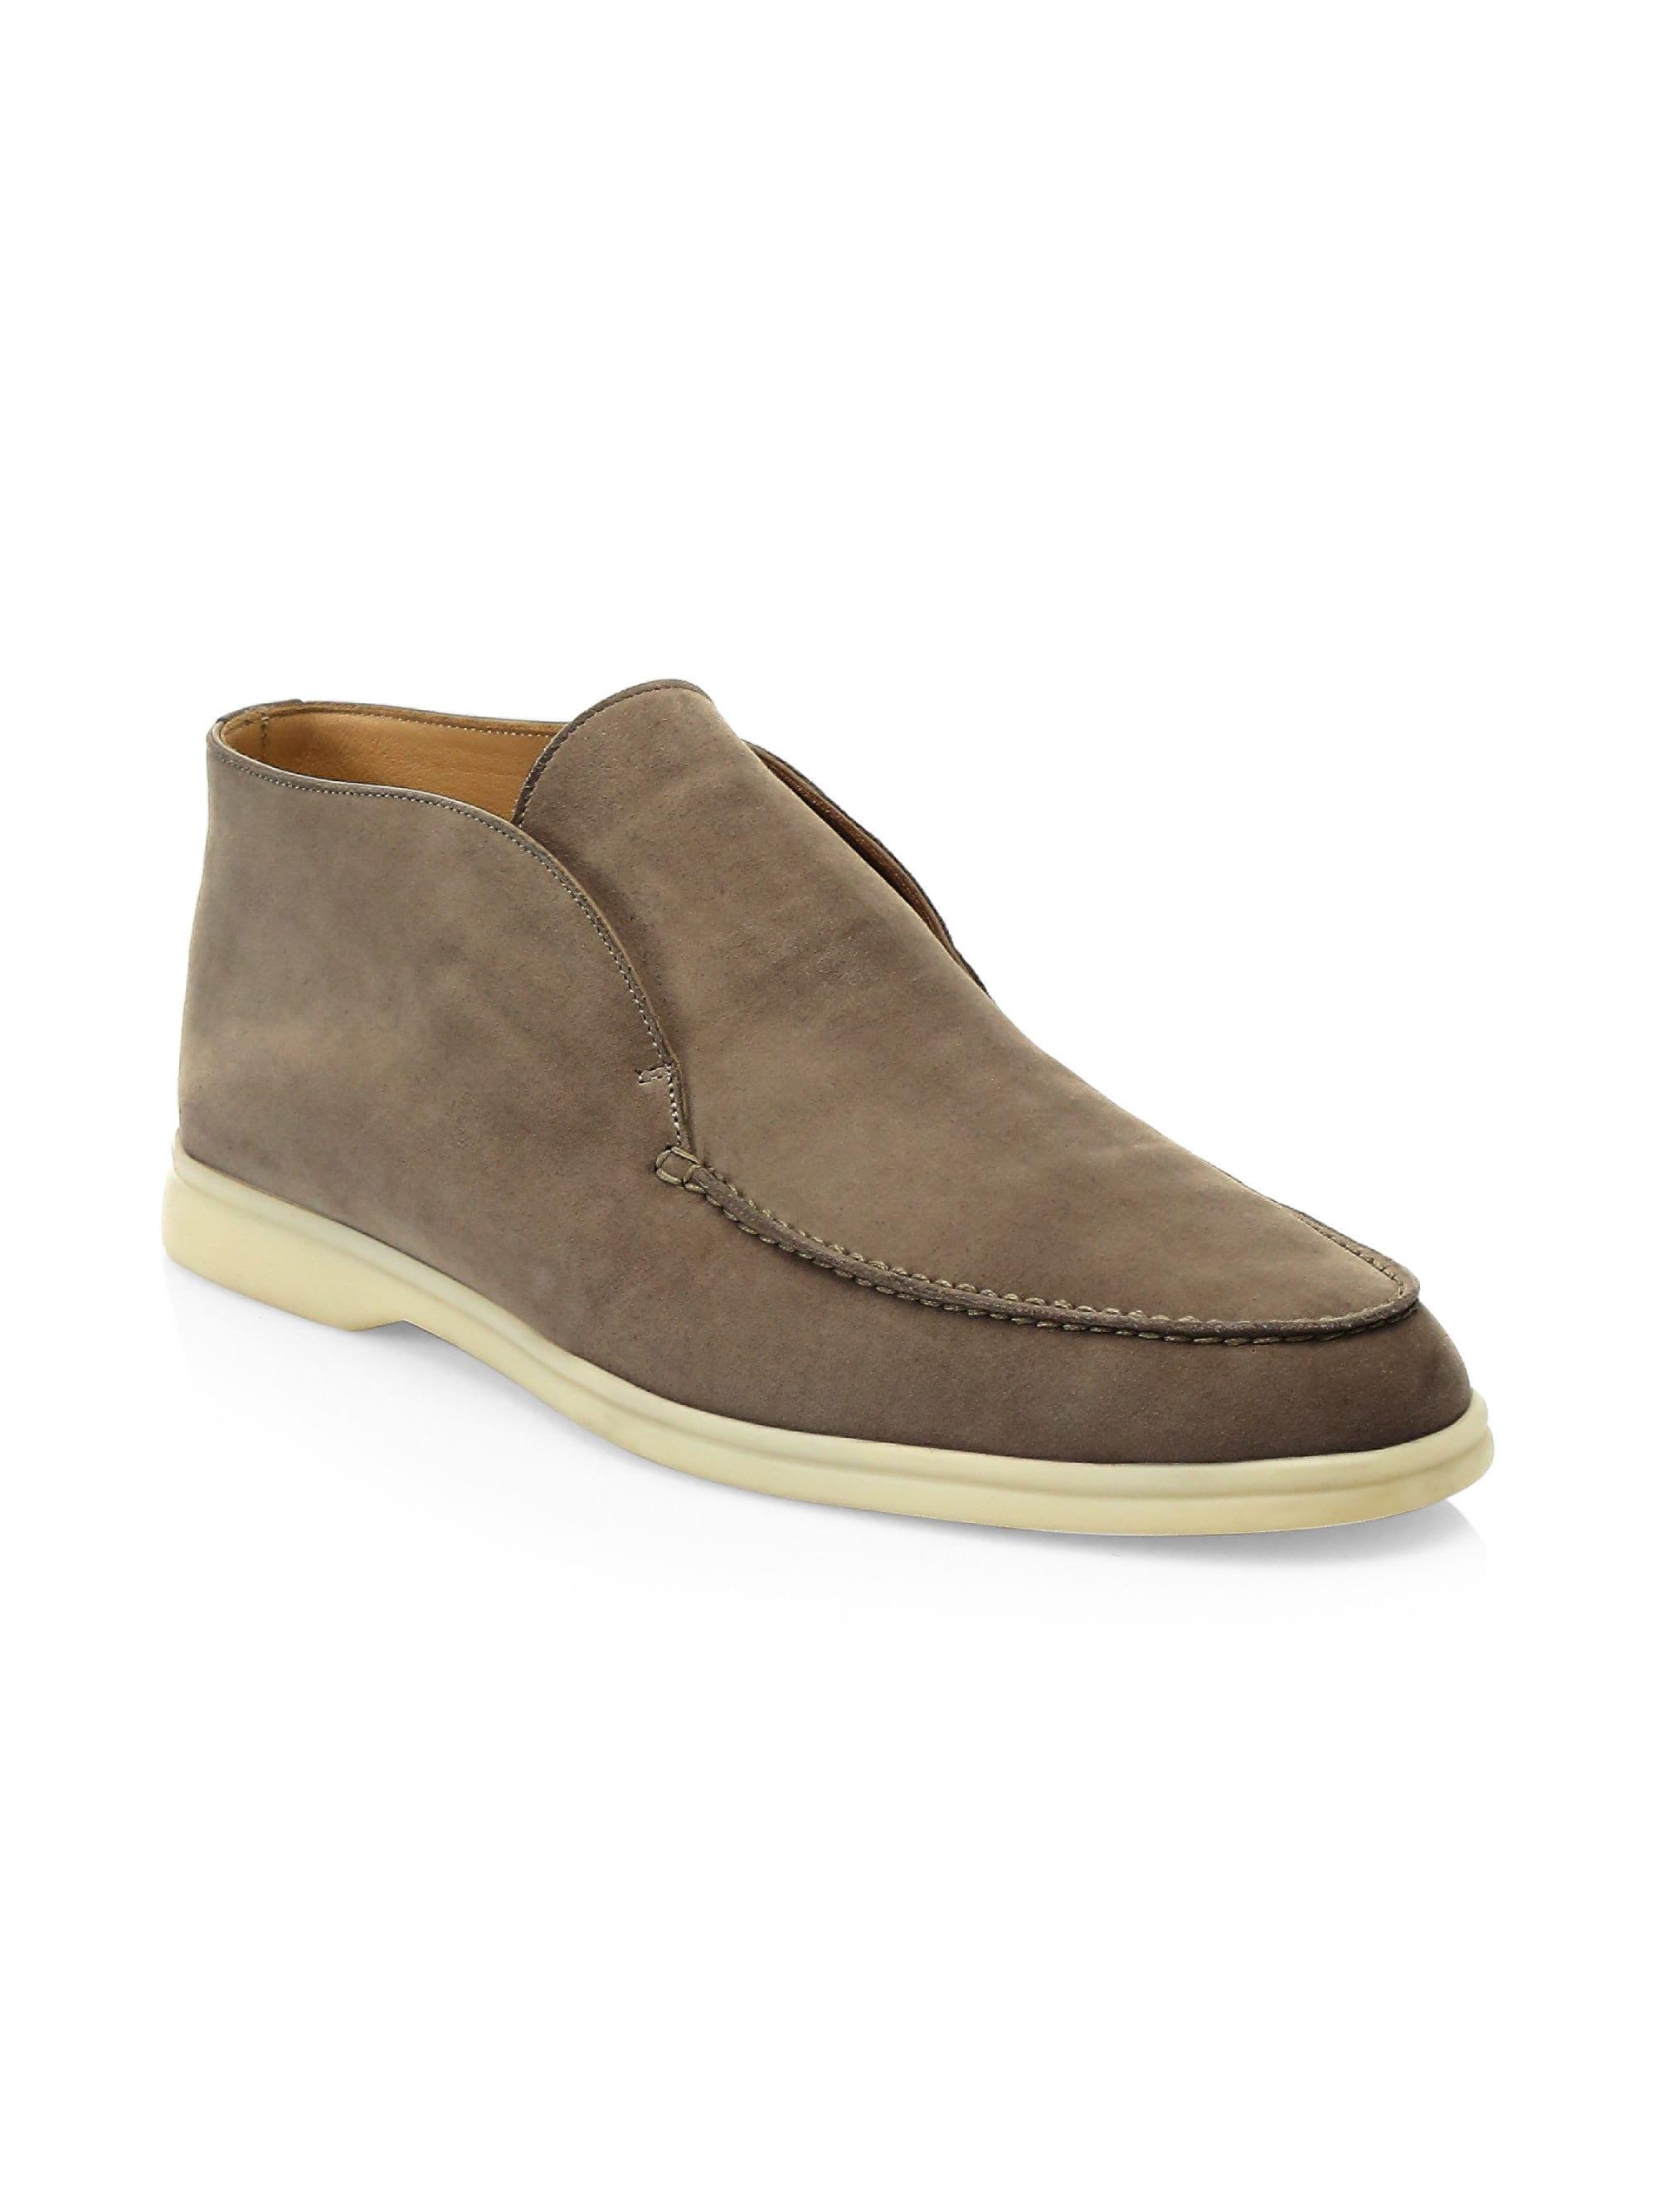 Lyst - Loro Piana Suede Derby Shoes for Men